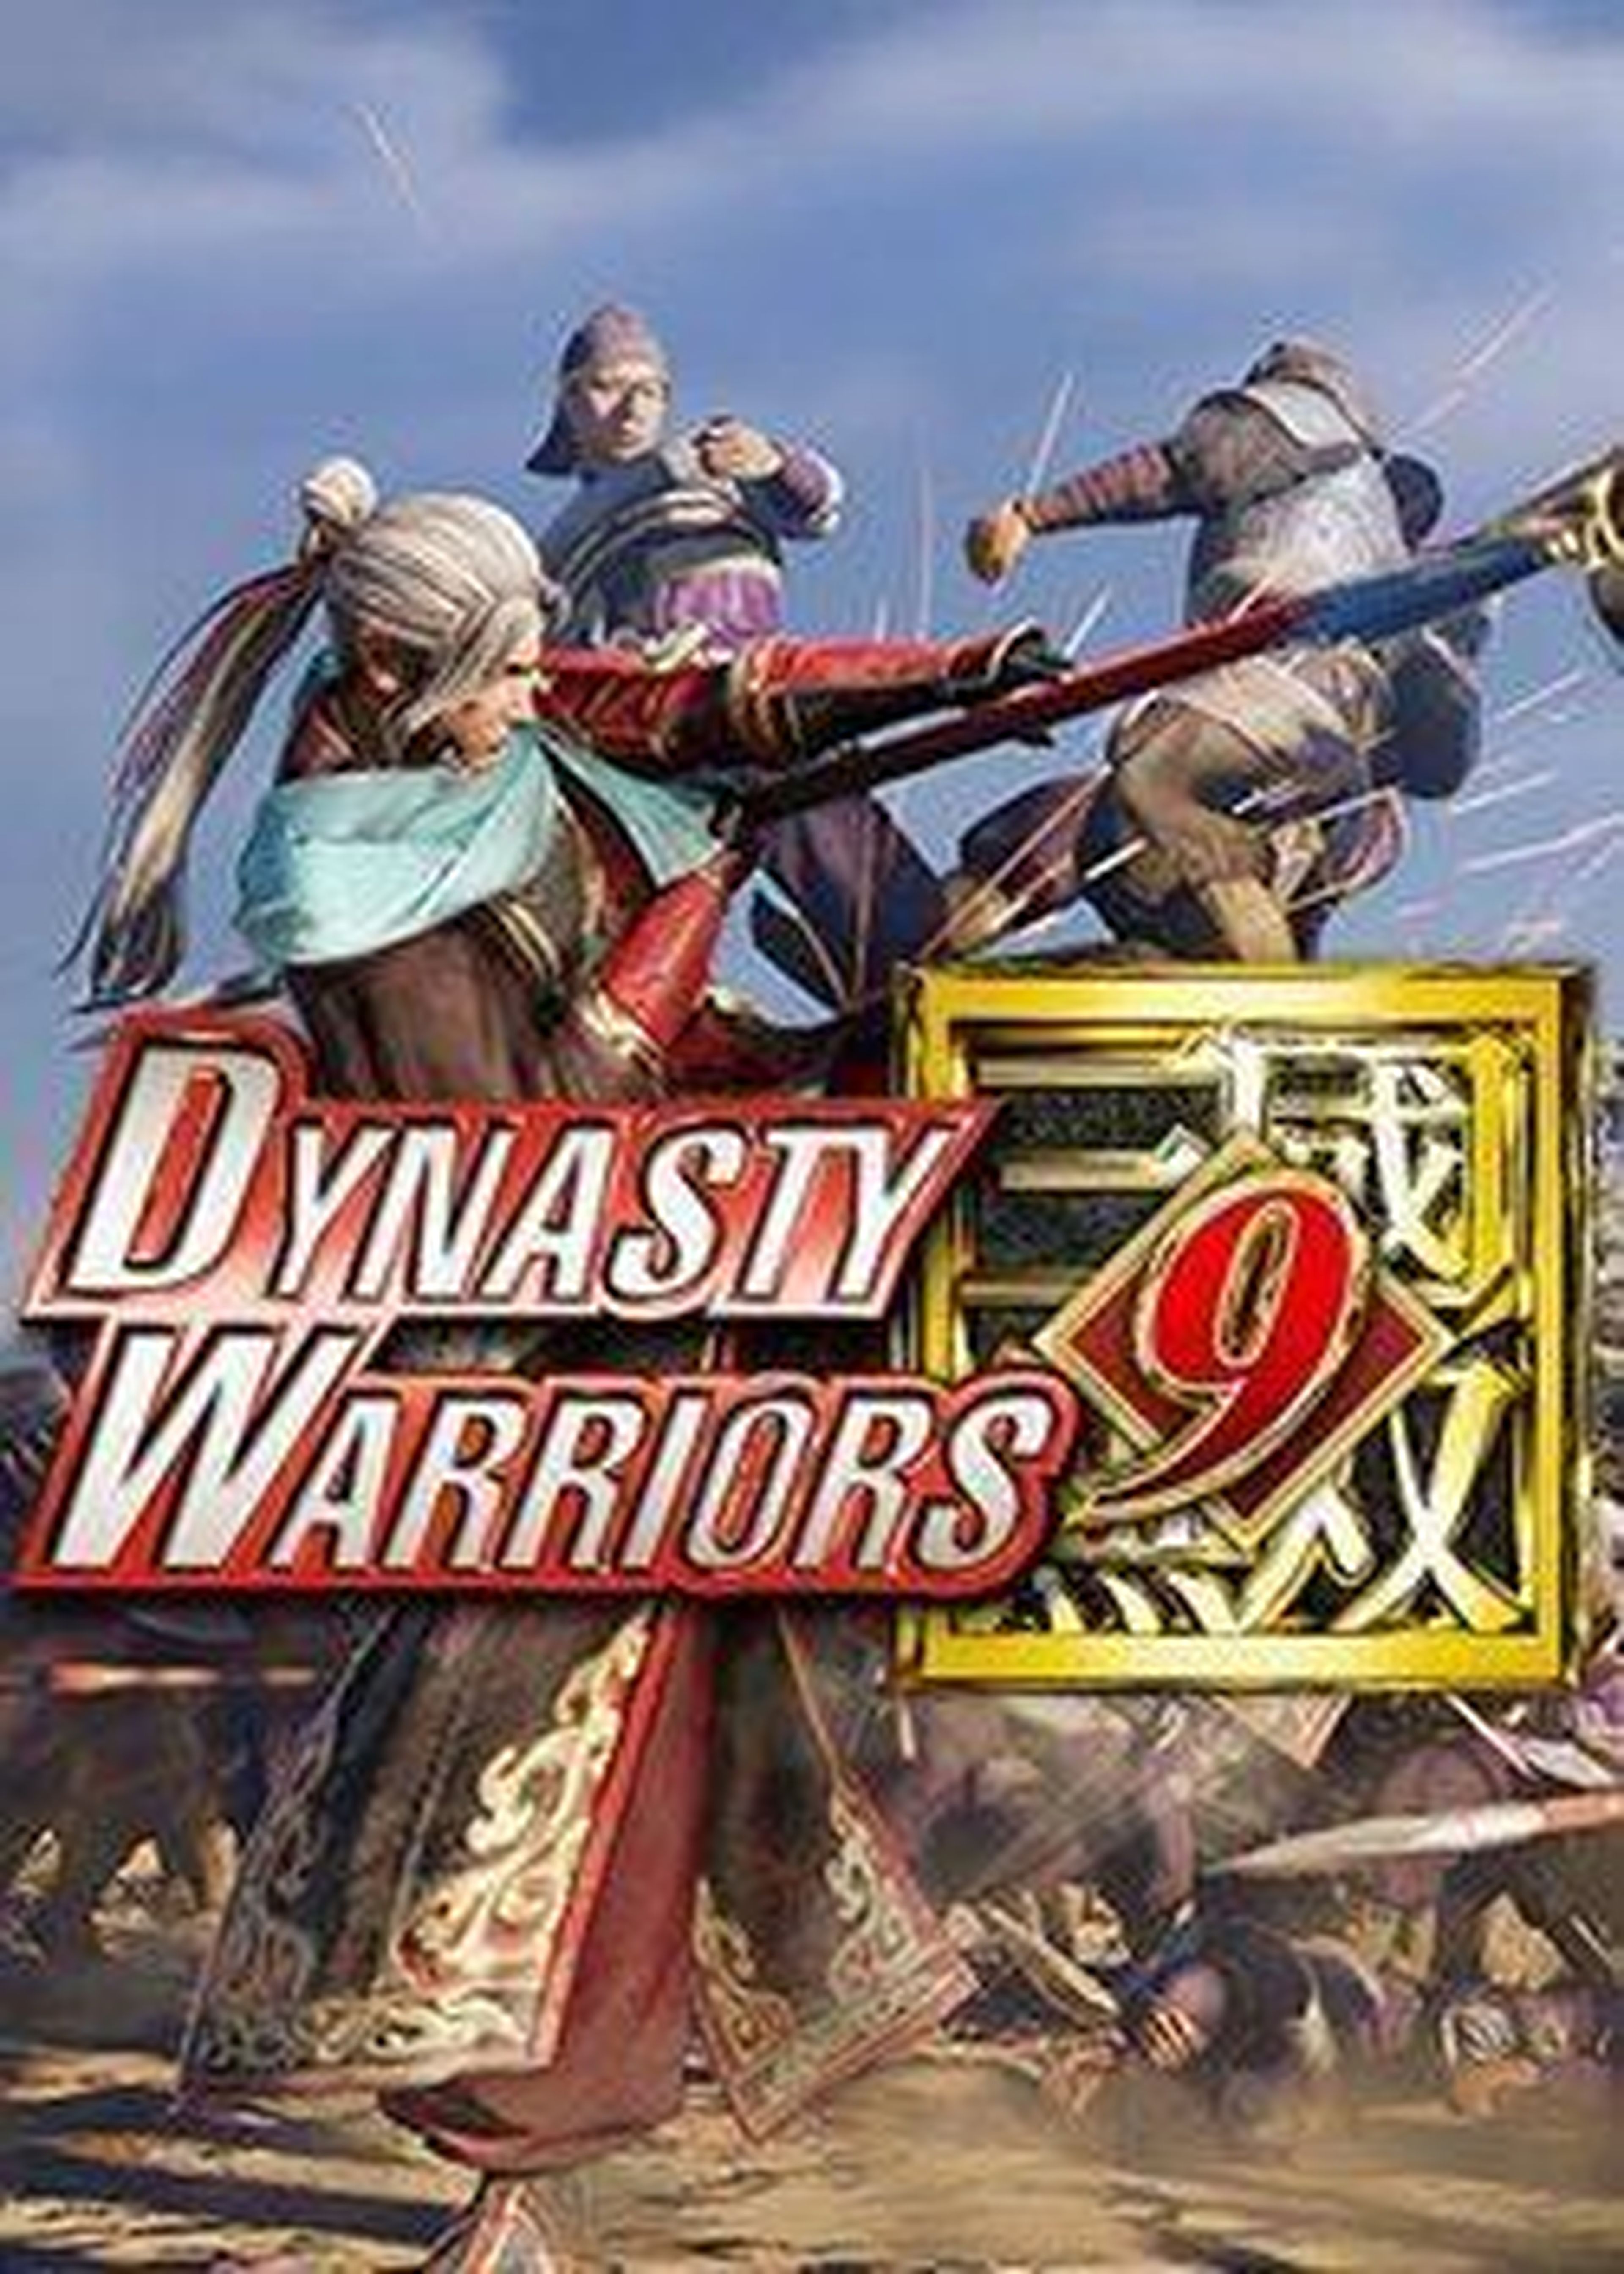 Dynasty Warriors 9 cover